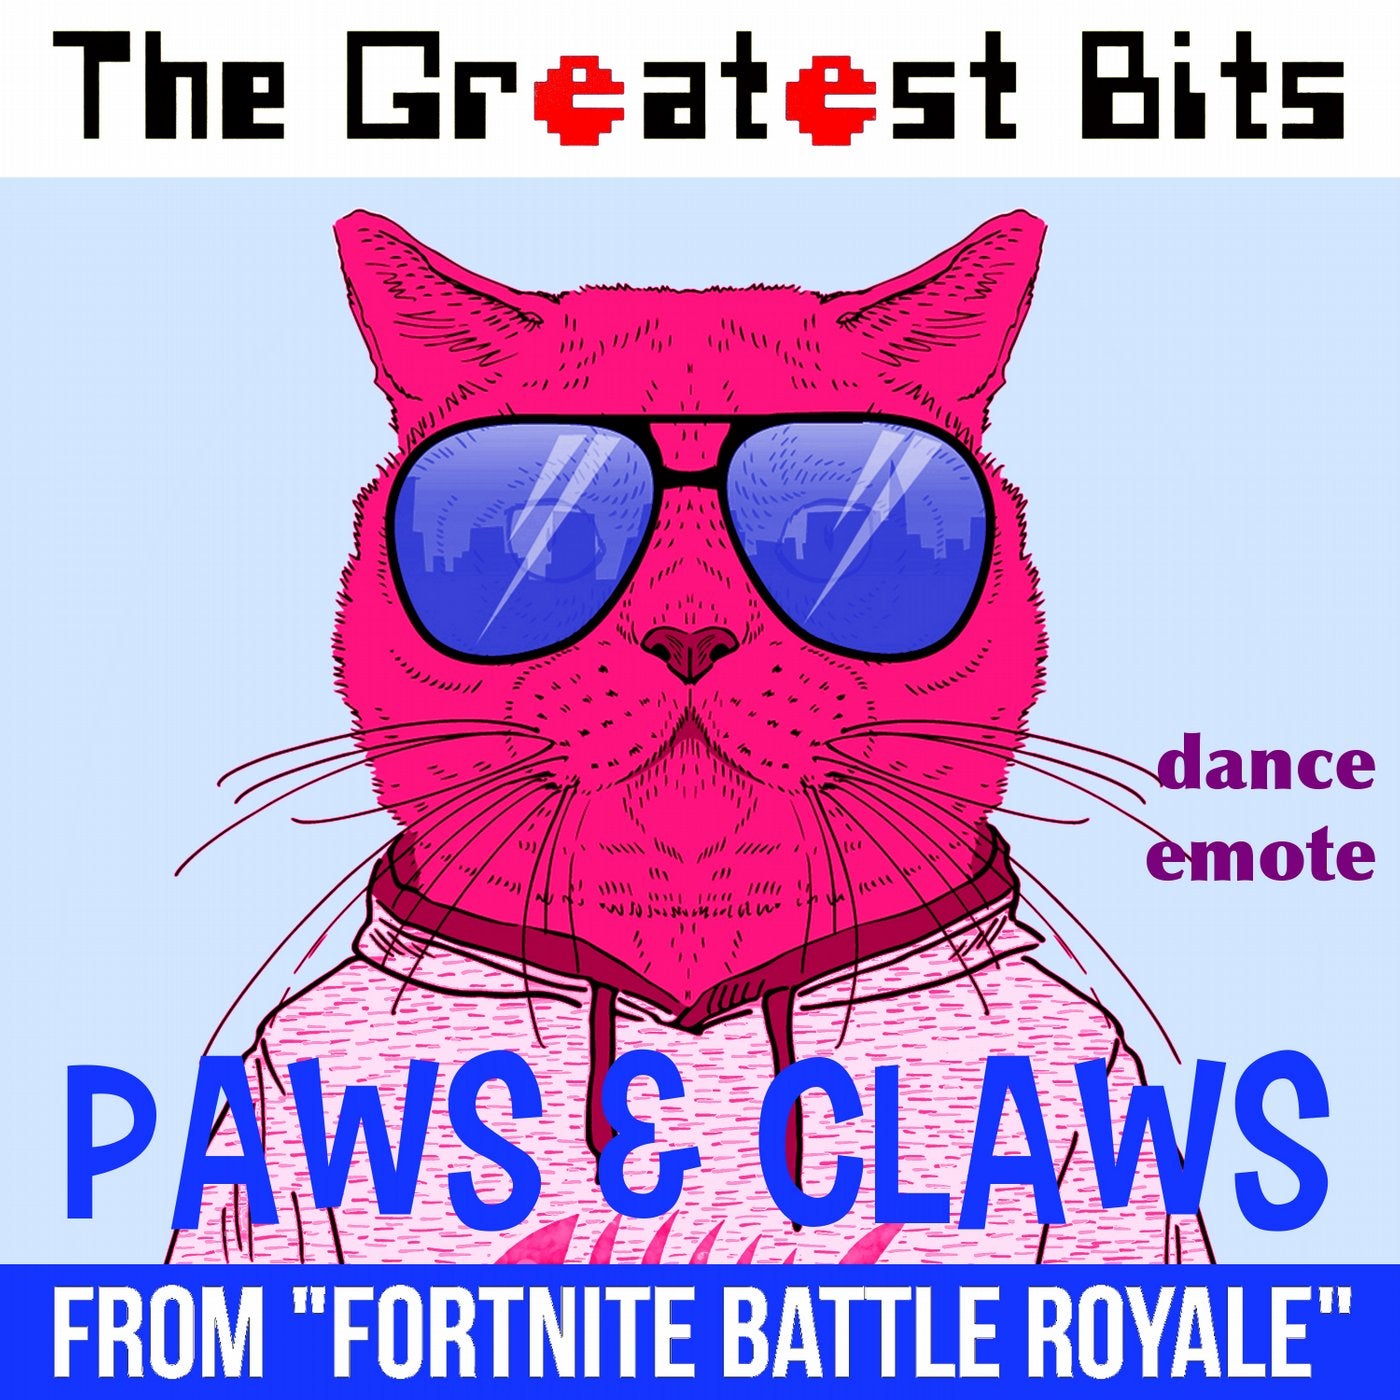 Paws & Claws Dance Emote (from "Fortnite Battle Royale")